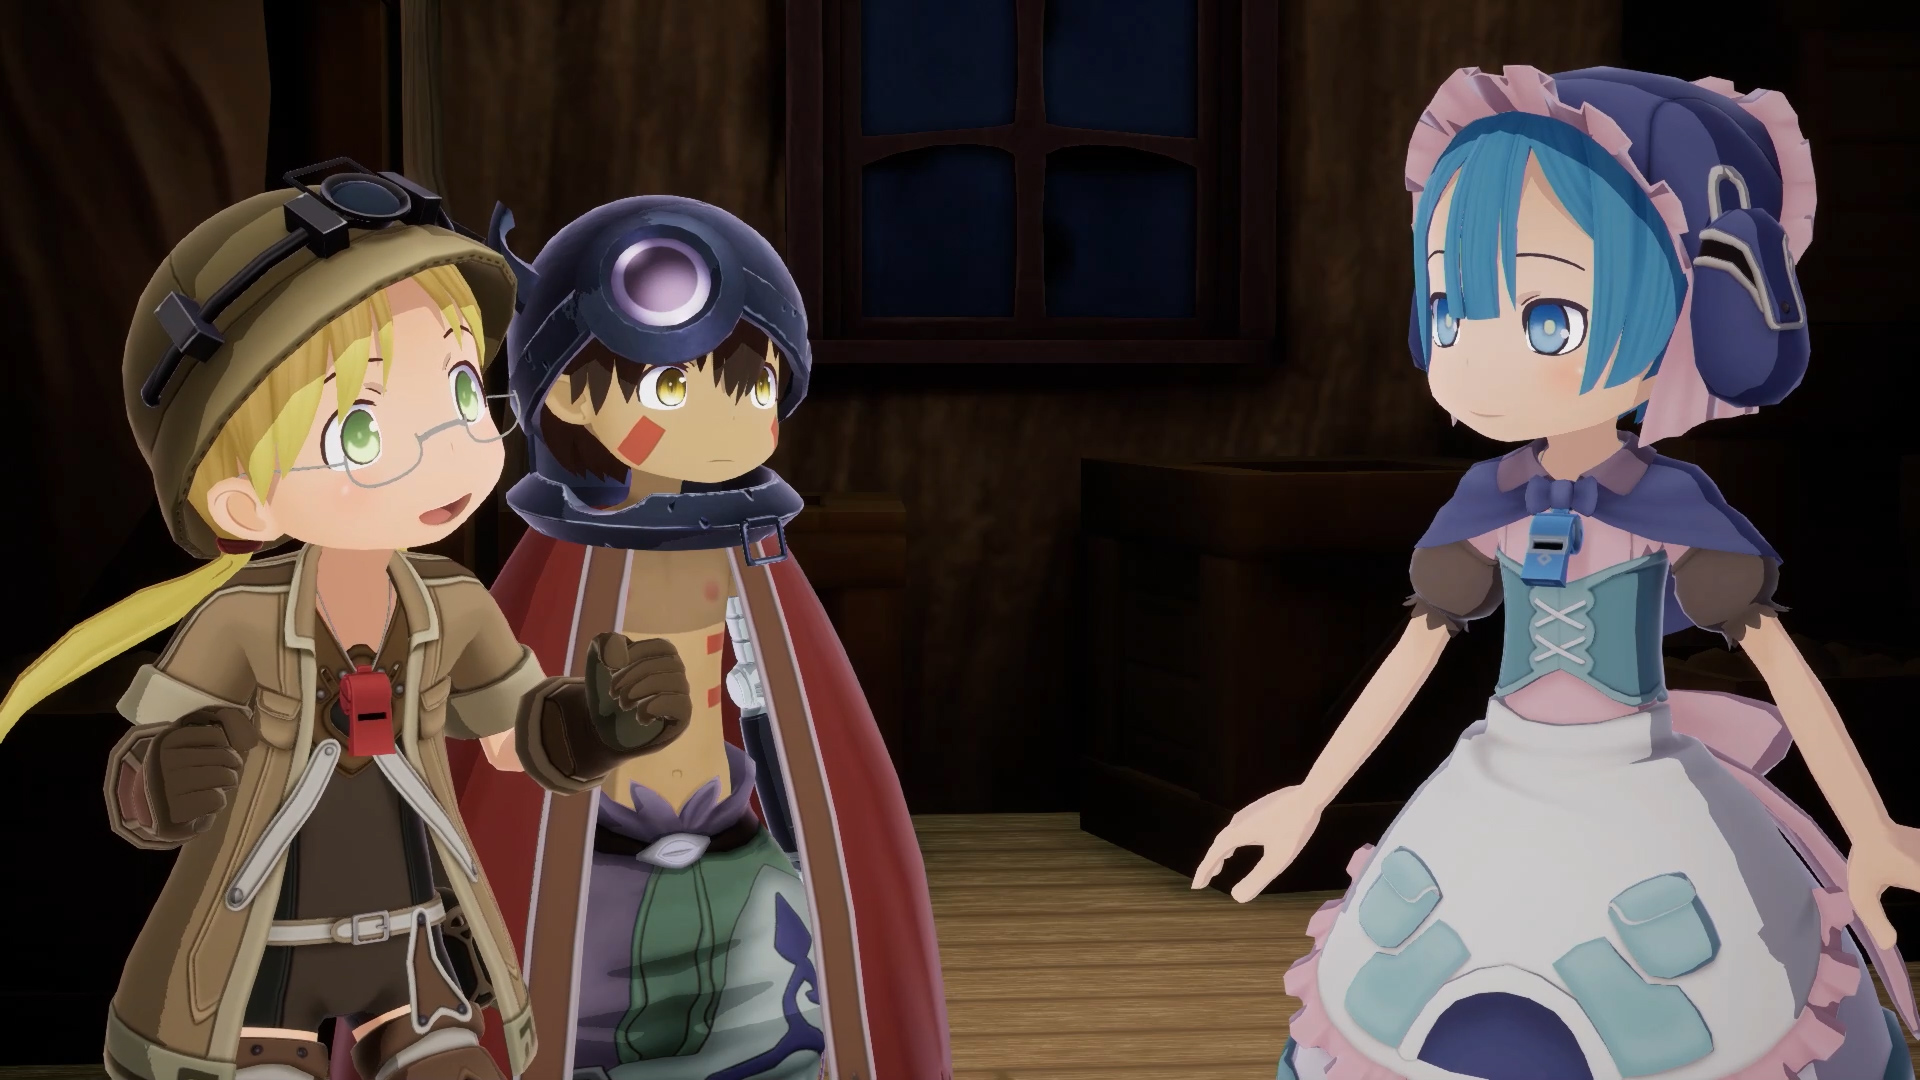 Made in Abyss: Binary Star Falling into Darkness Coming Fall 2022